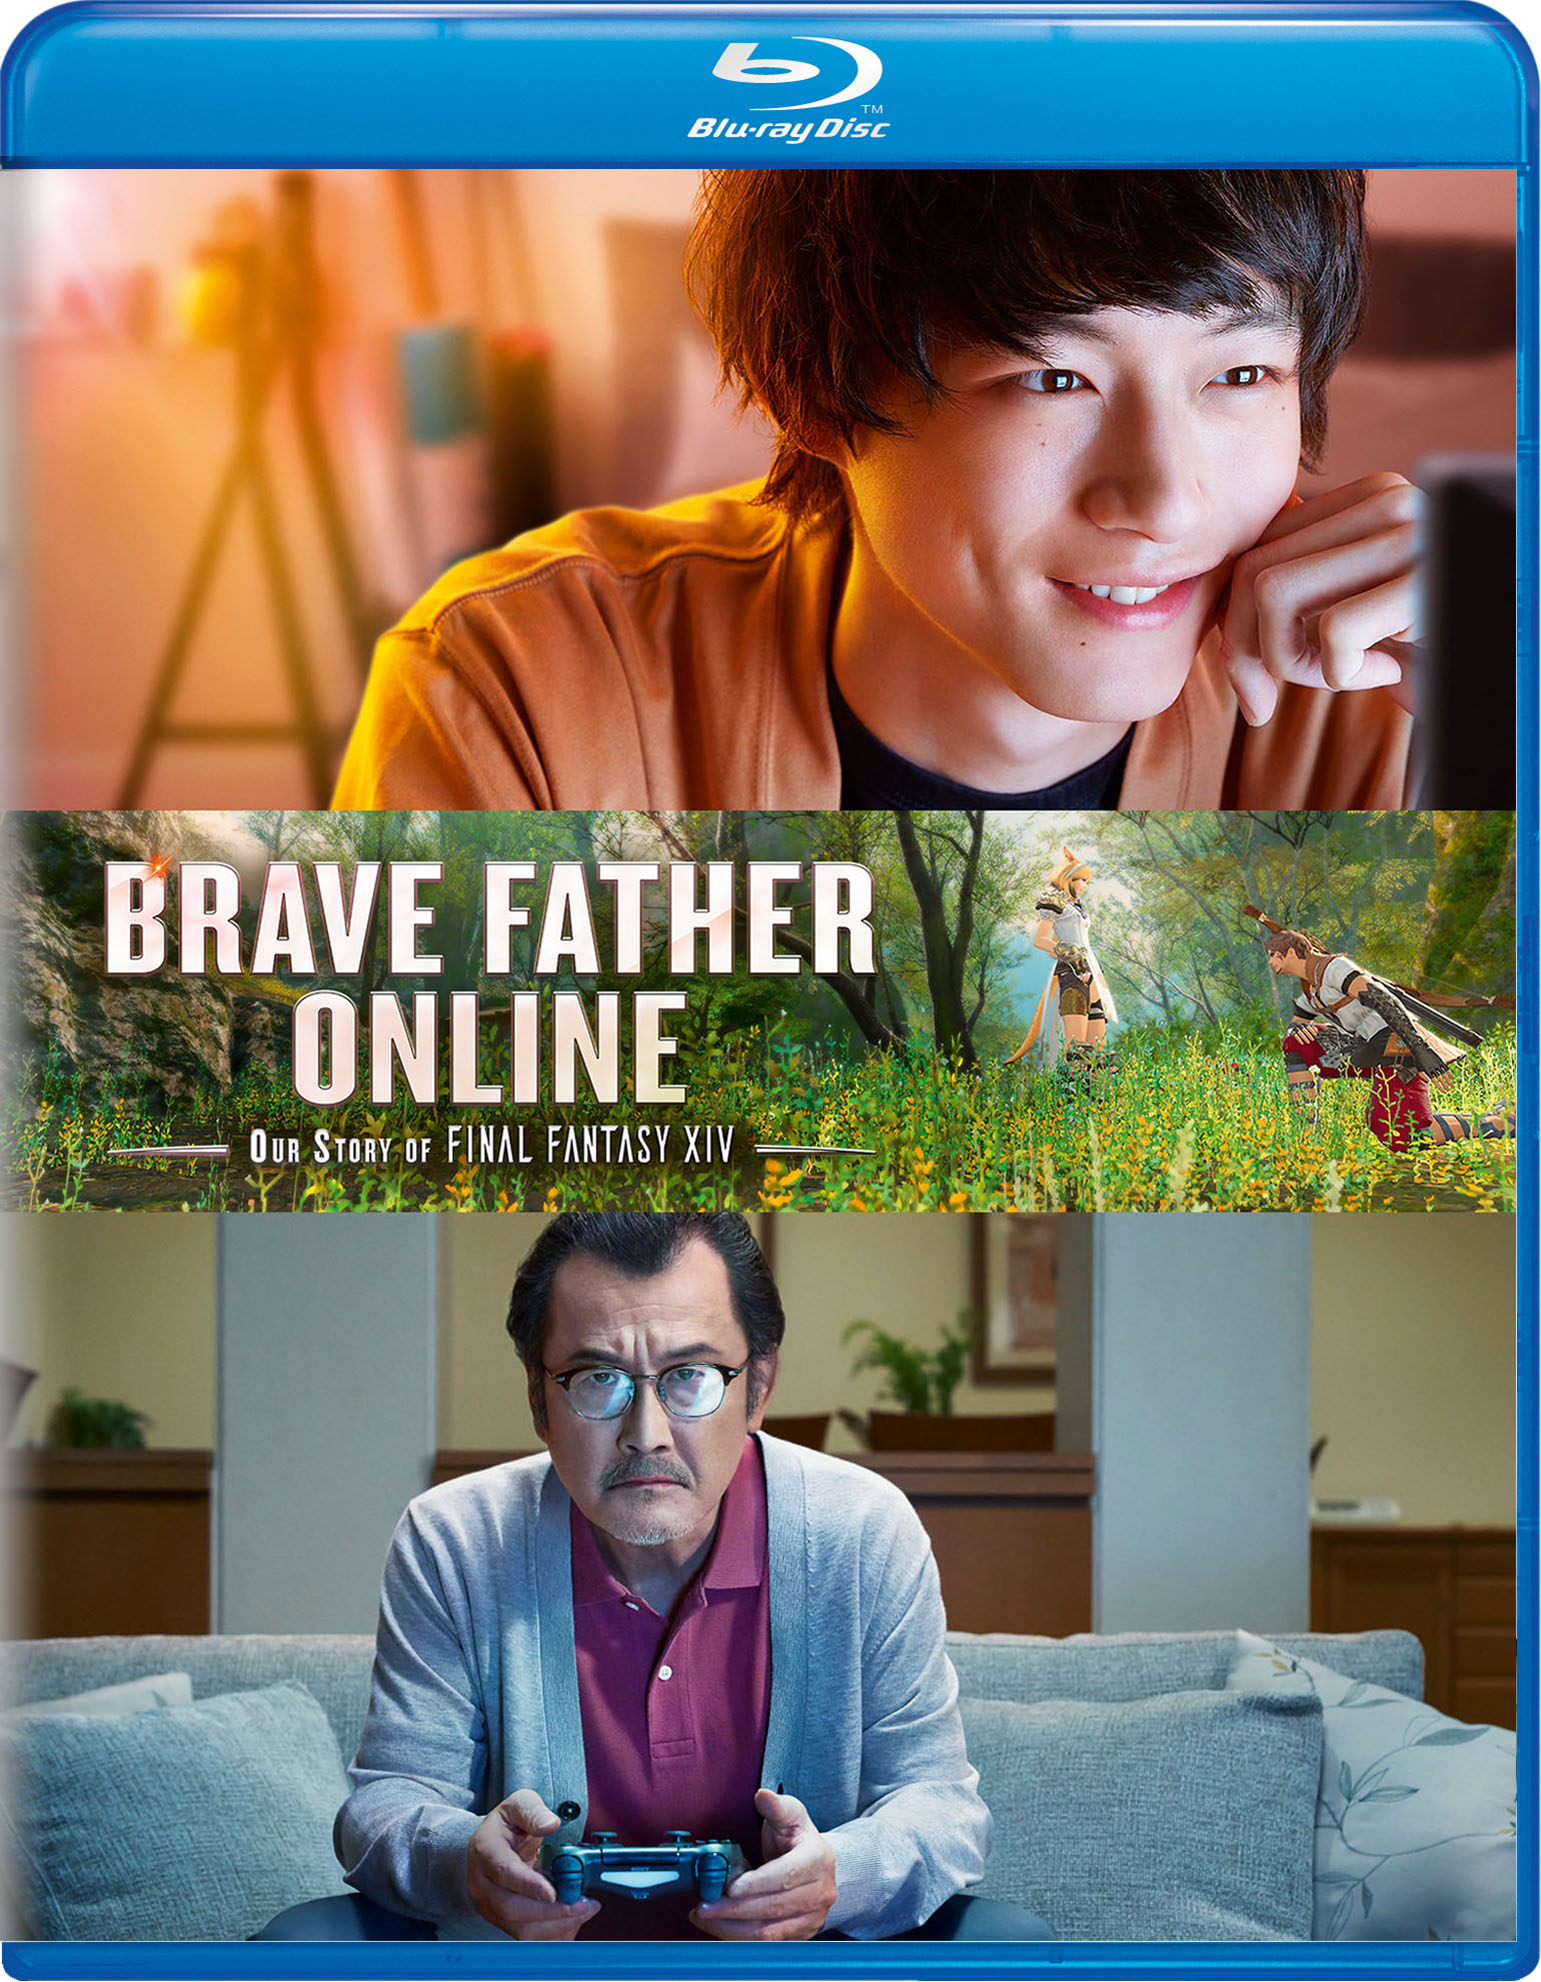 Brave Father Online: Our Story Of Final Fantasy XIV - Blu-ray